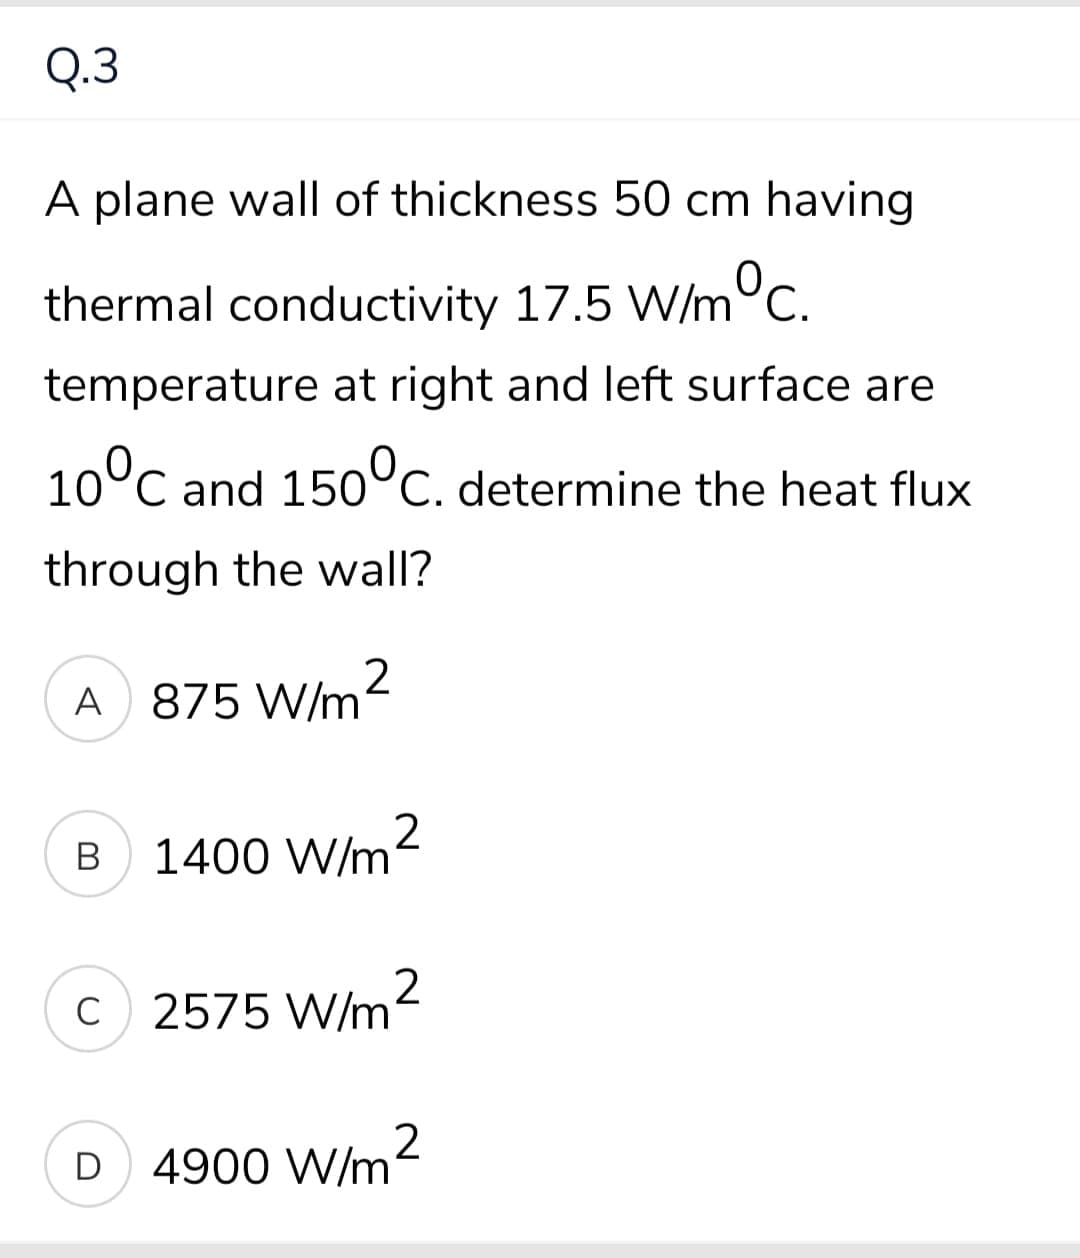 Q.3
A plane wall of thickness 50 cm having
thermal conductivity 17.5 W/m°c.
temperature at right and left surface are
10°C and 15o°c. determine the heat flux
through the wall?
A 875 W/m
B
1400 W/m
C
2575 W/m2
D
4900 W/m2
